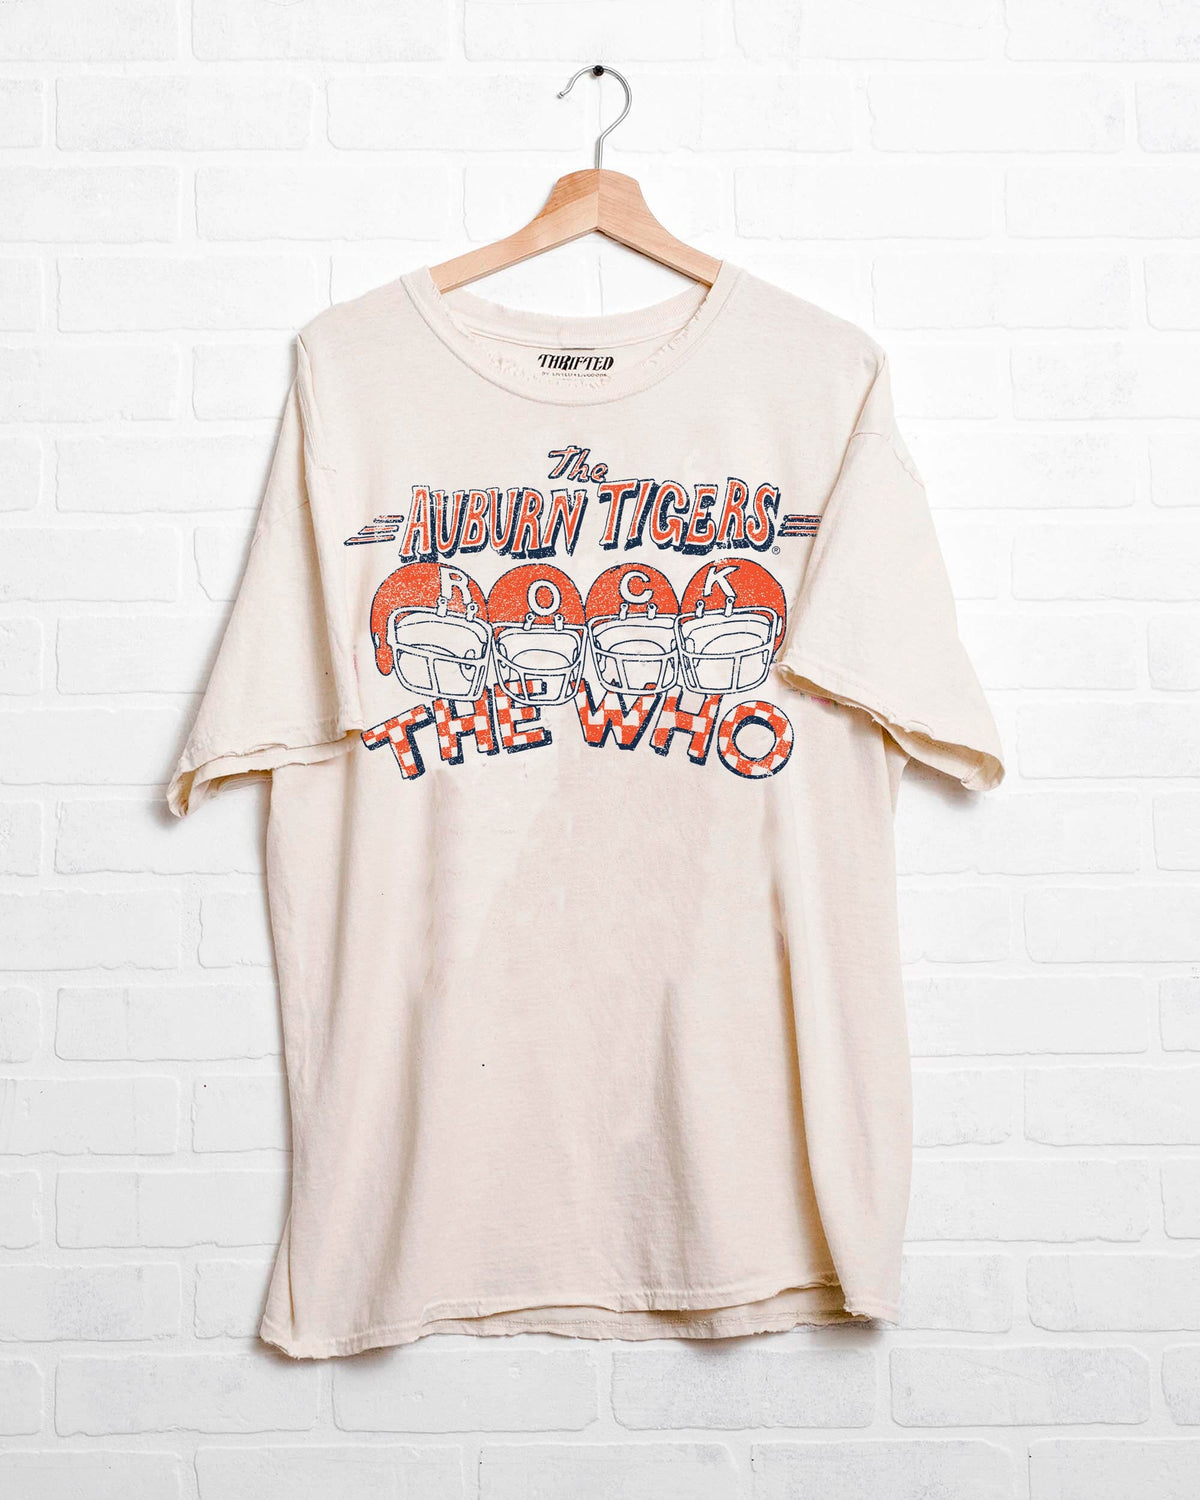 The Who Auburn Tigers Rock Off White Thrifted Tee